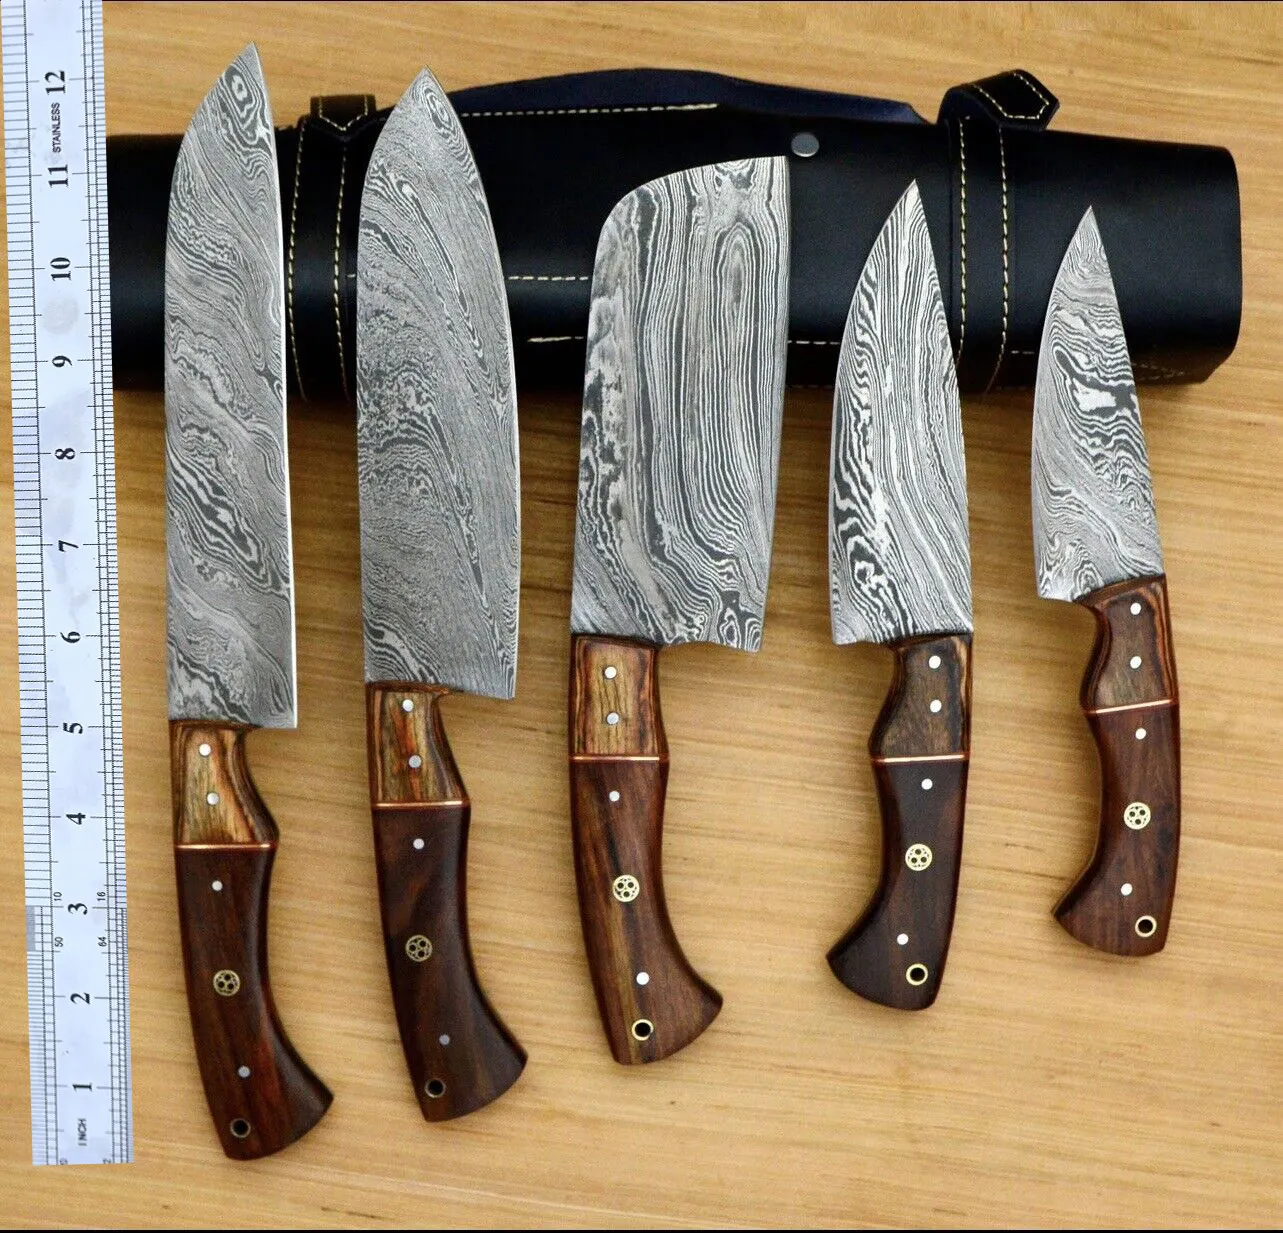 Professional 5pcs Slicer Chef Knife Sets Damascus Steel Set Kitchen Knives with Leather sheath